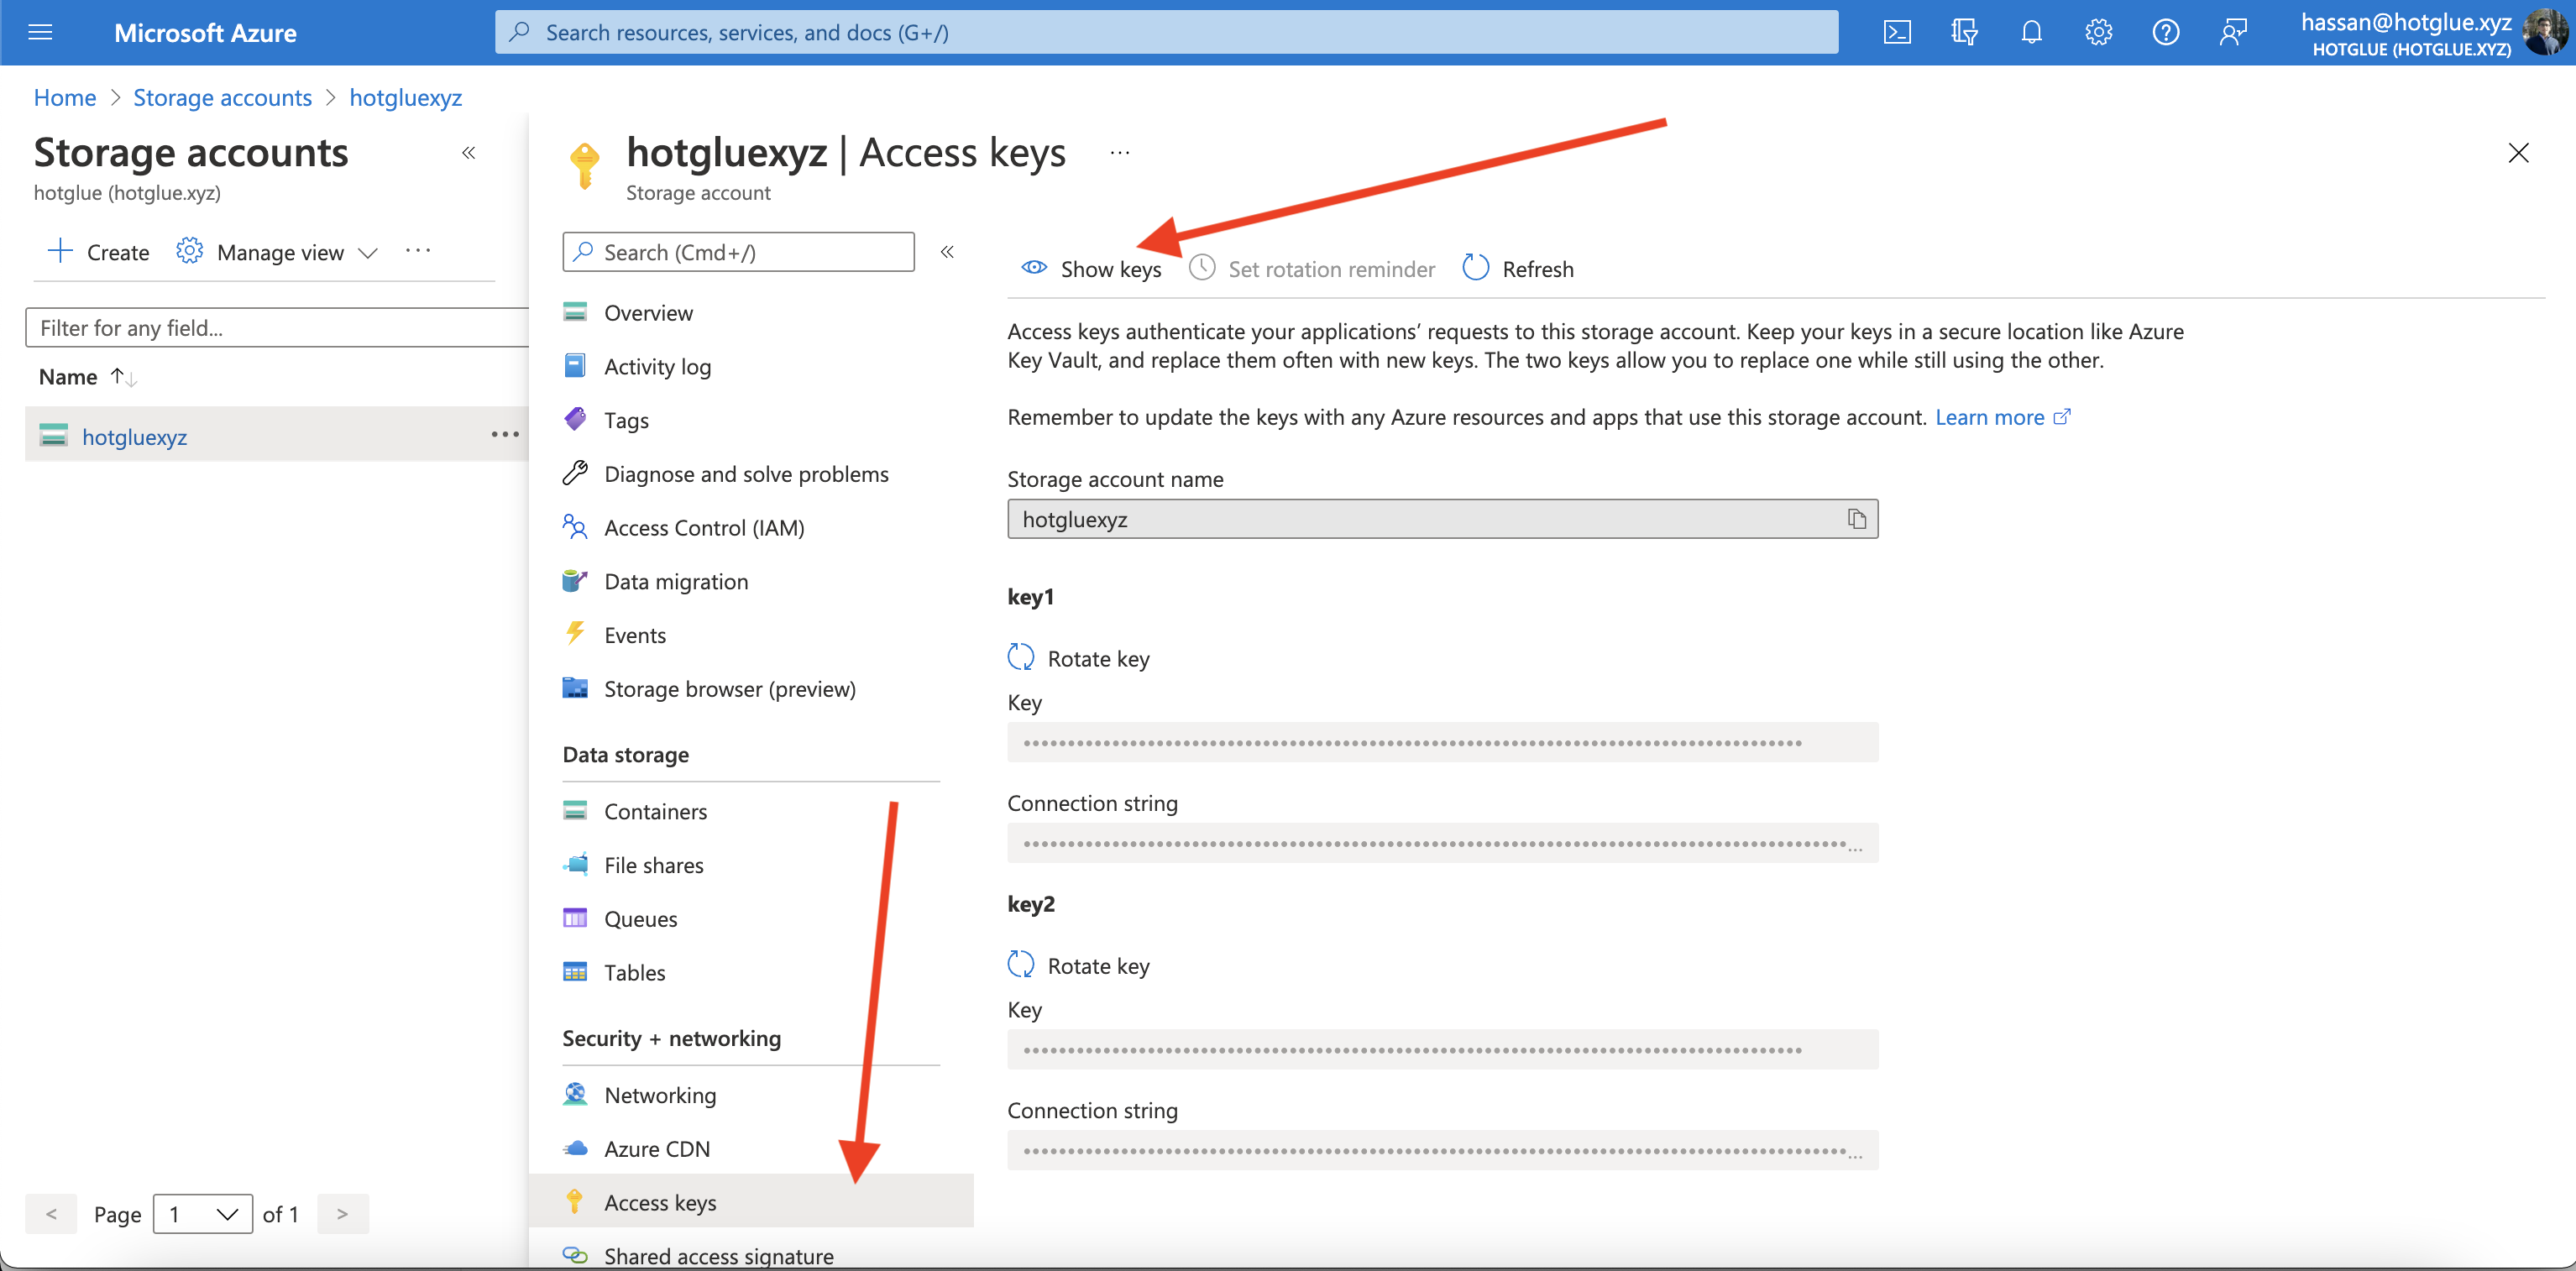 Get Connection string from Azure